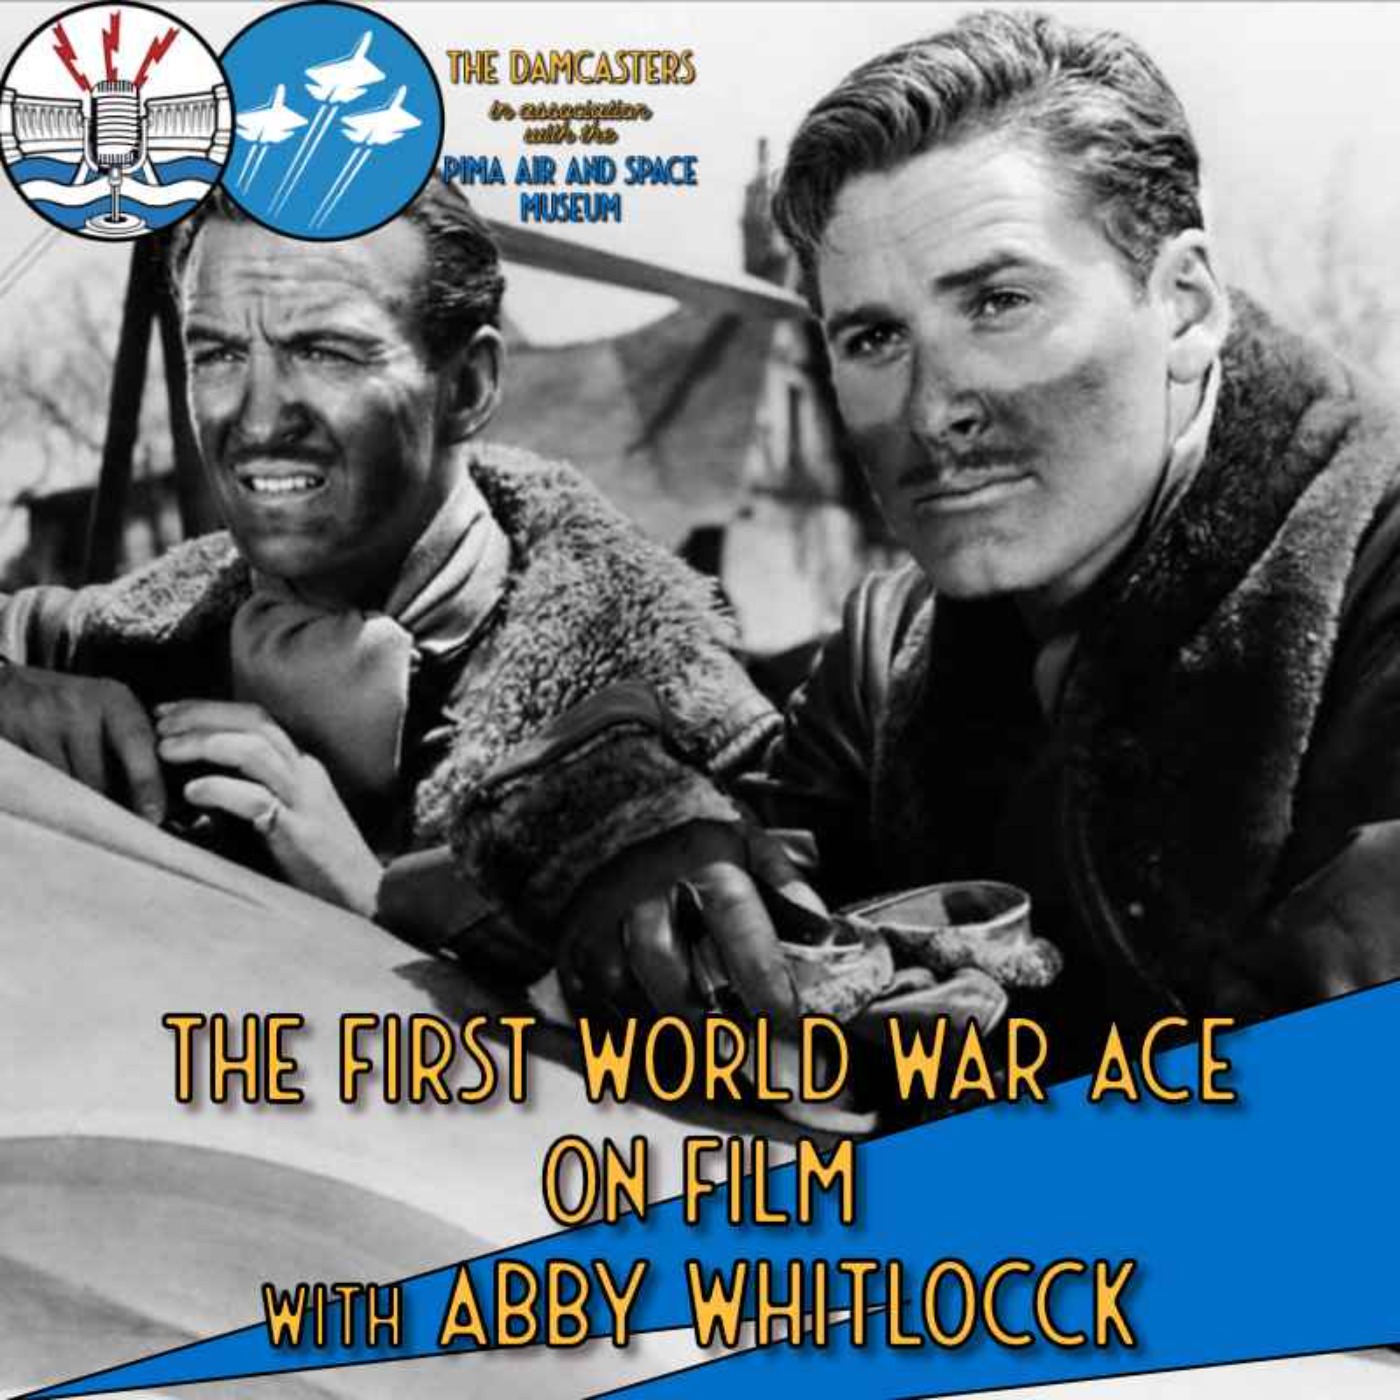 The First World War Ace on Film with Abby Whitlock